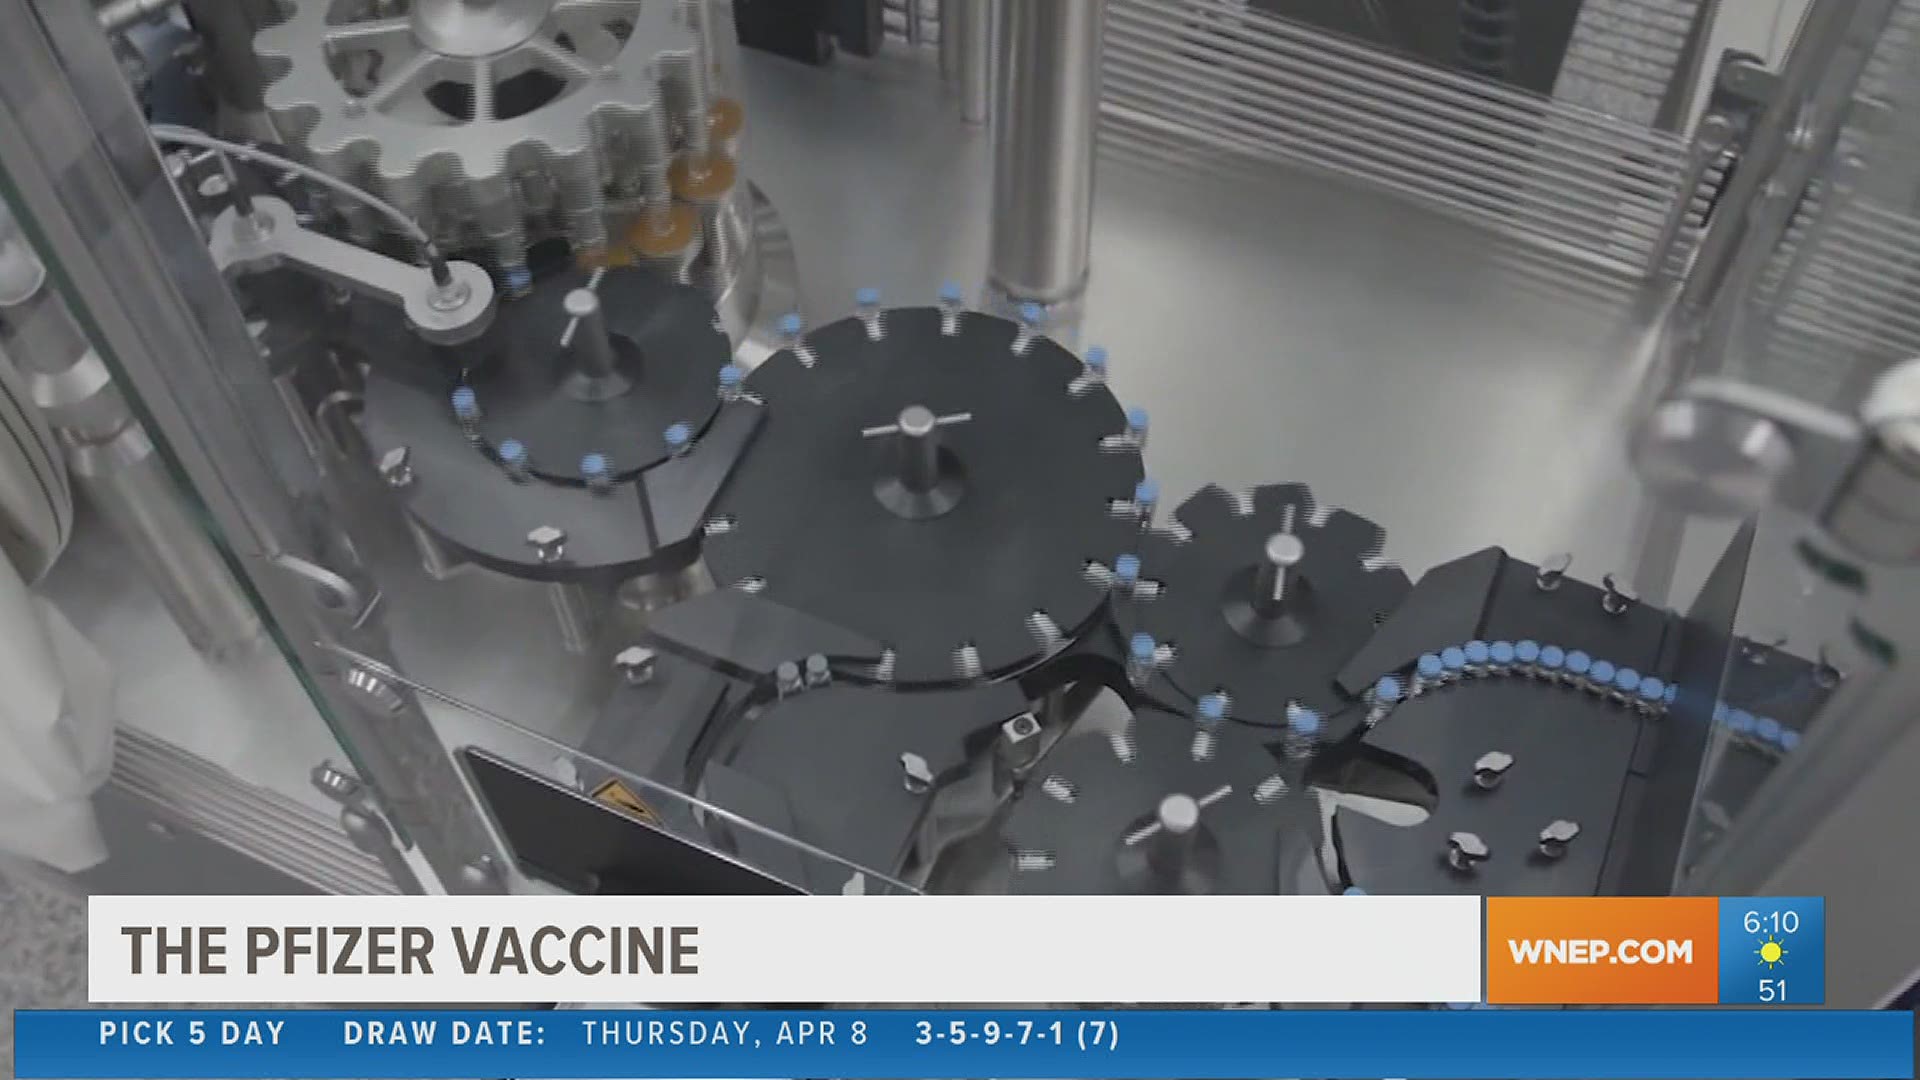 Ryan Leckey answered viewers' questions about the vaccines Friday morning.